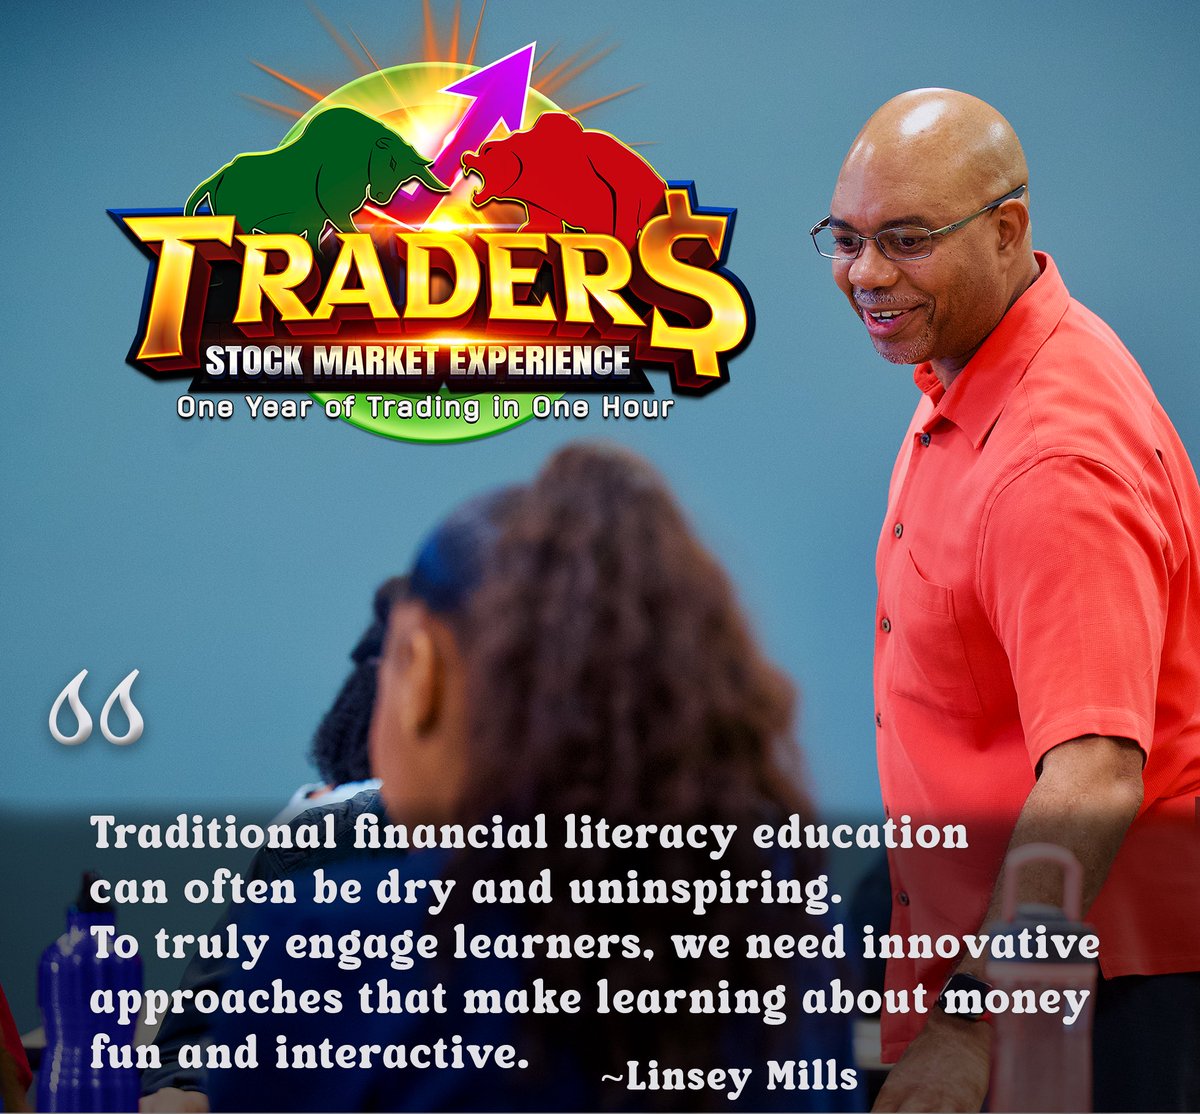 Traditional financial literacy education can often be dry and uninspiring. To truly engage learners, we need innovative approaches that make learning about money, fun and interactive. ~Linsey Mills
#FunLearning #EngagementStrategies #financialliteracy #financialliteracyforkids